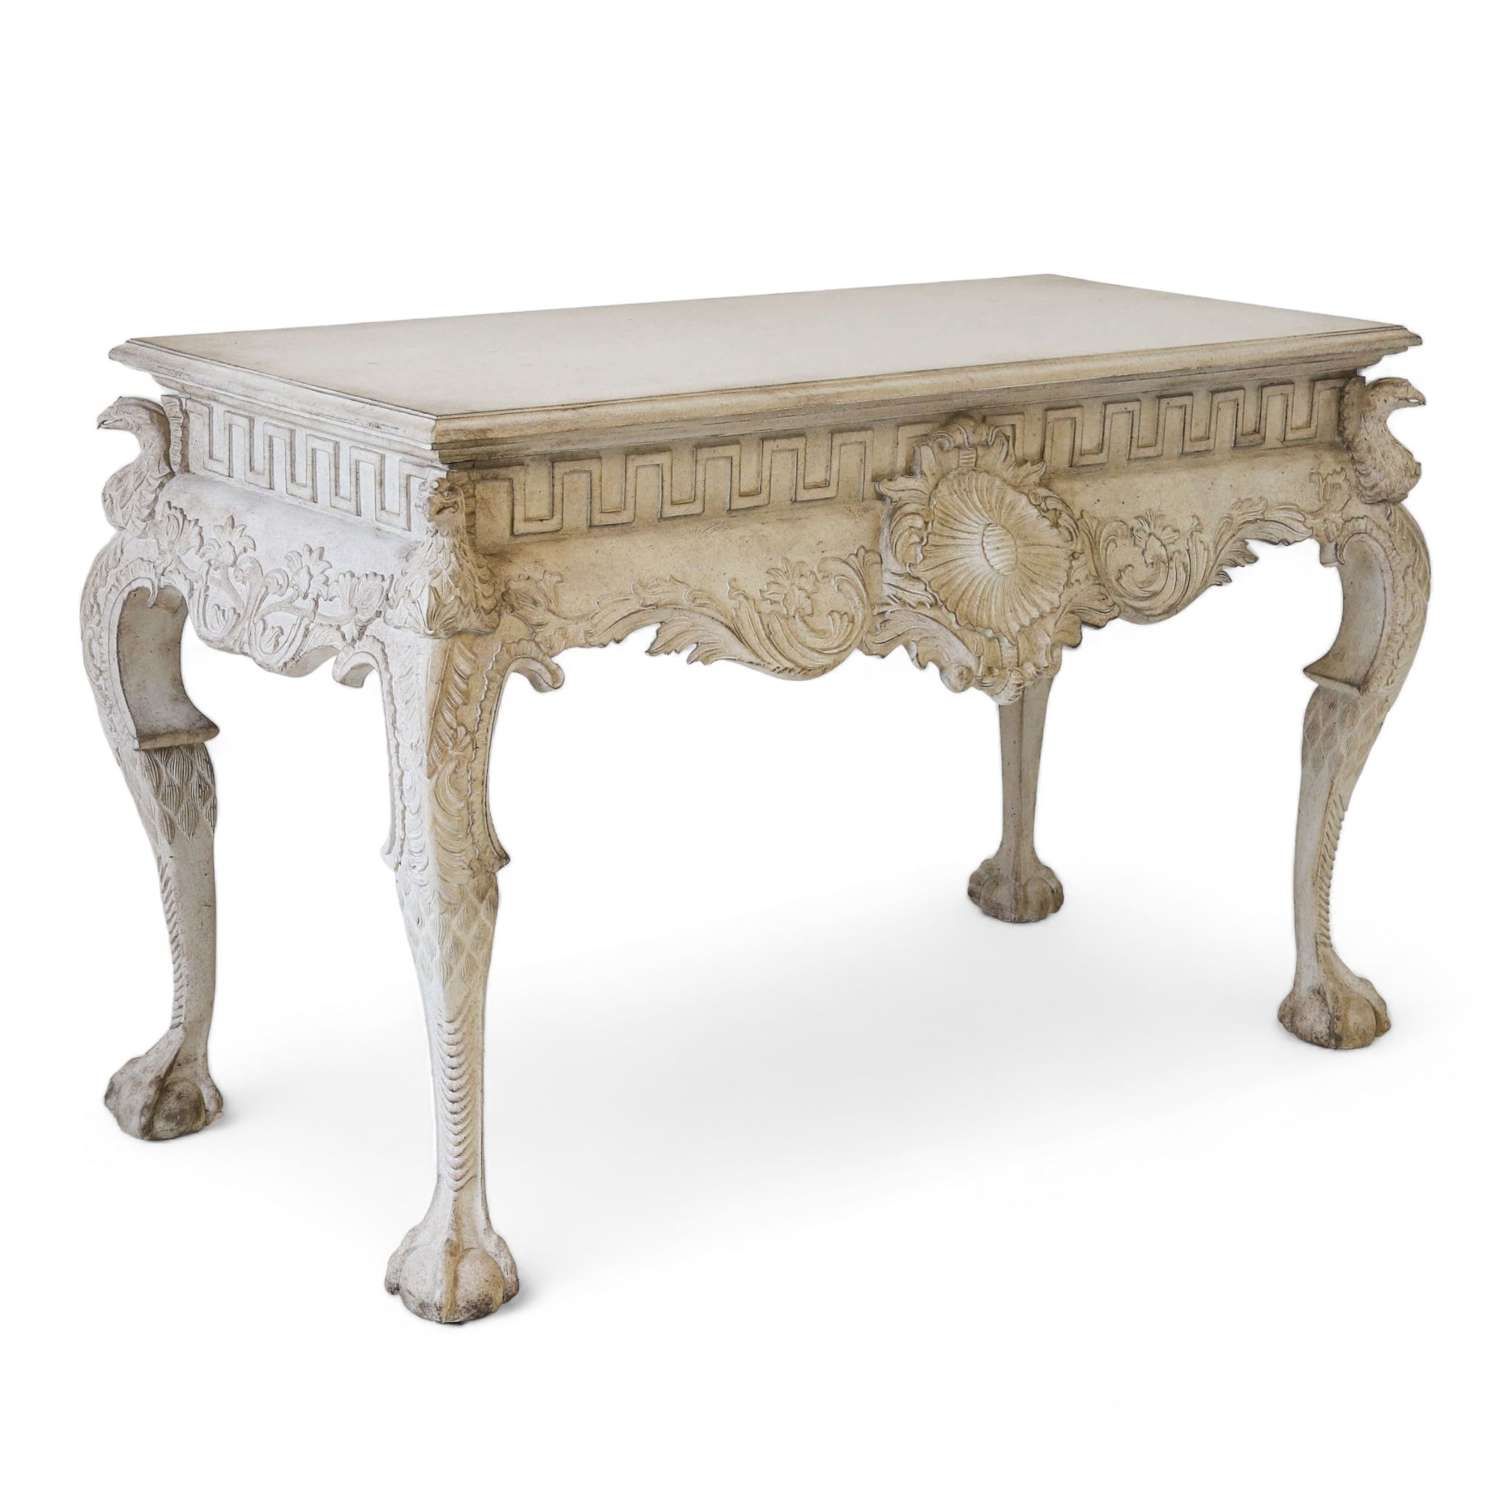 20th Century Ornate and Heavily Carved Painted Console Table